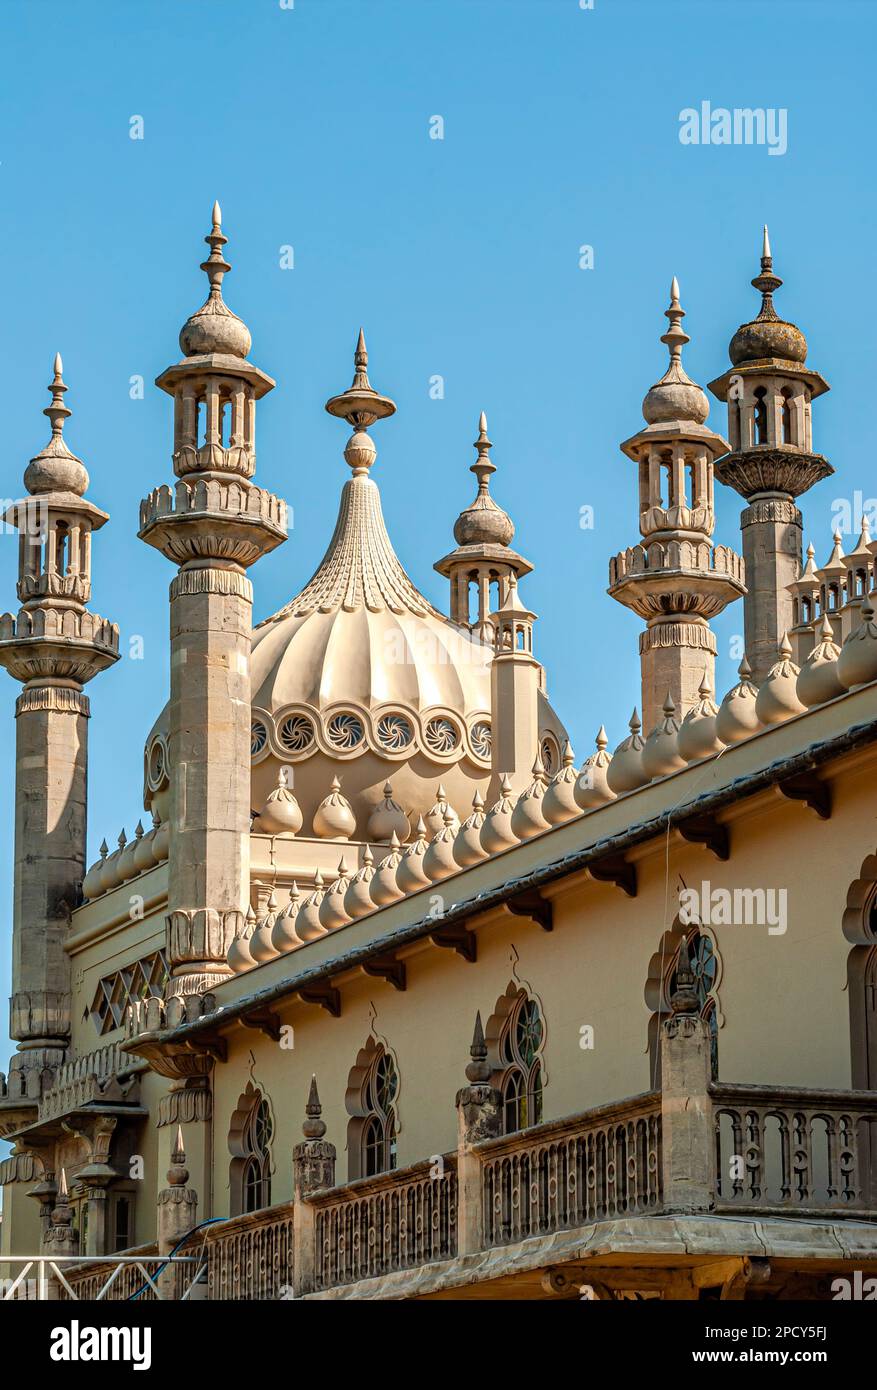 Architectural detail of the Royal Pavilion of Brighton, East Sussex, England Stock Photo